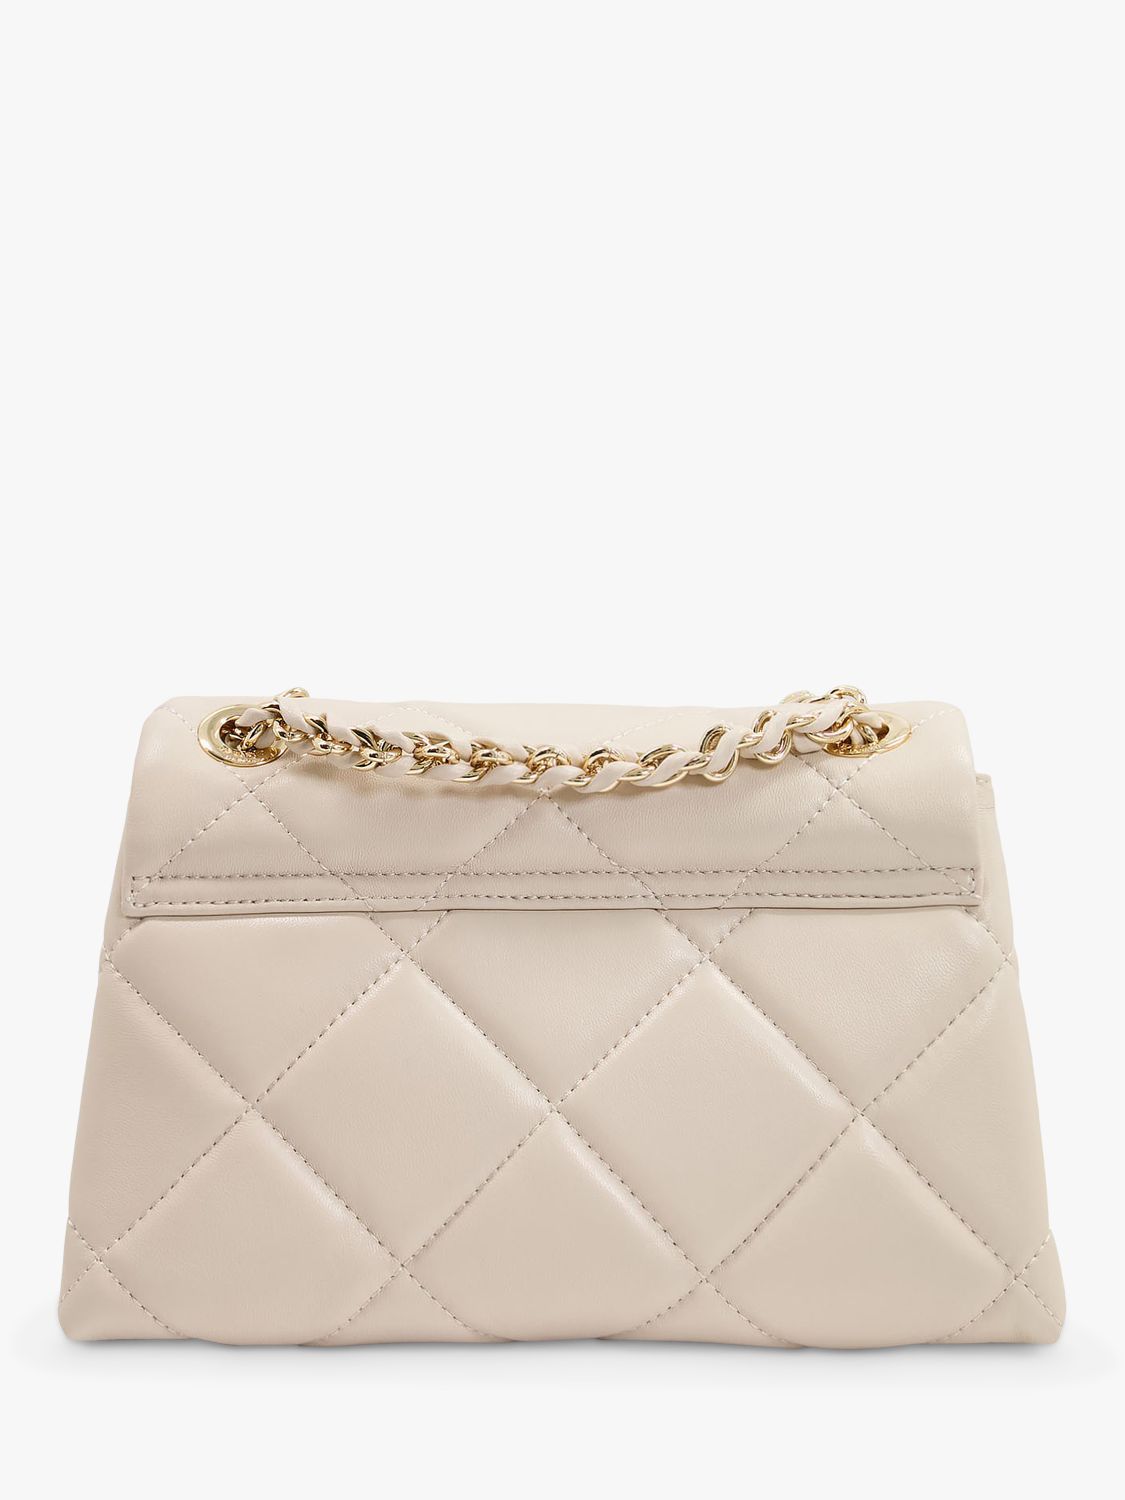 Dune Duchess Quilted Leather Shoulder Bag, Cream at John Lewis & Partners